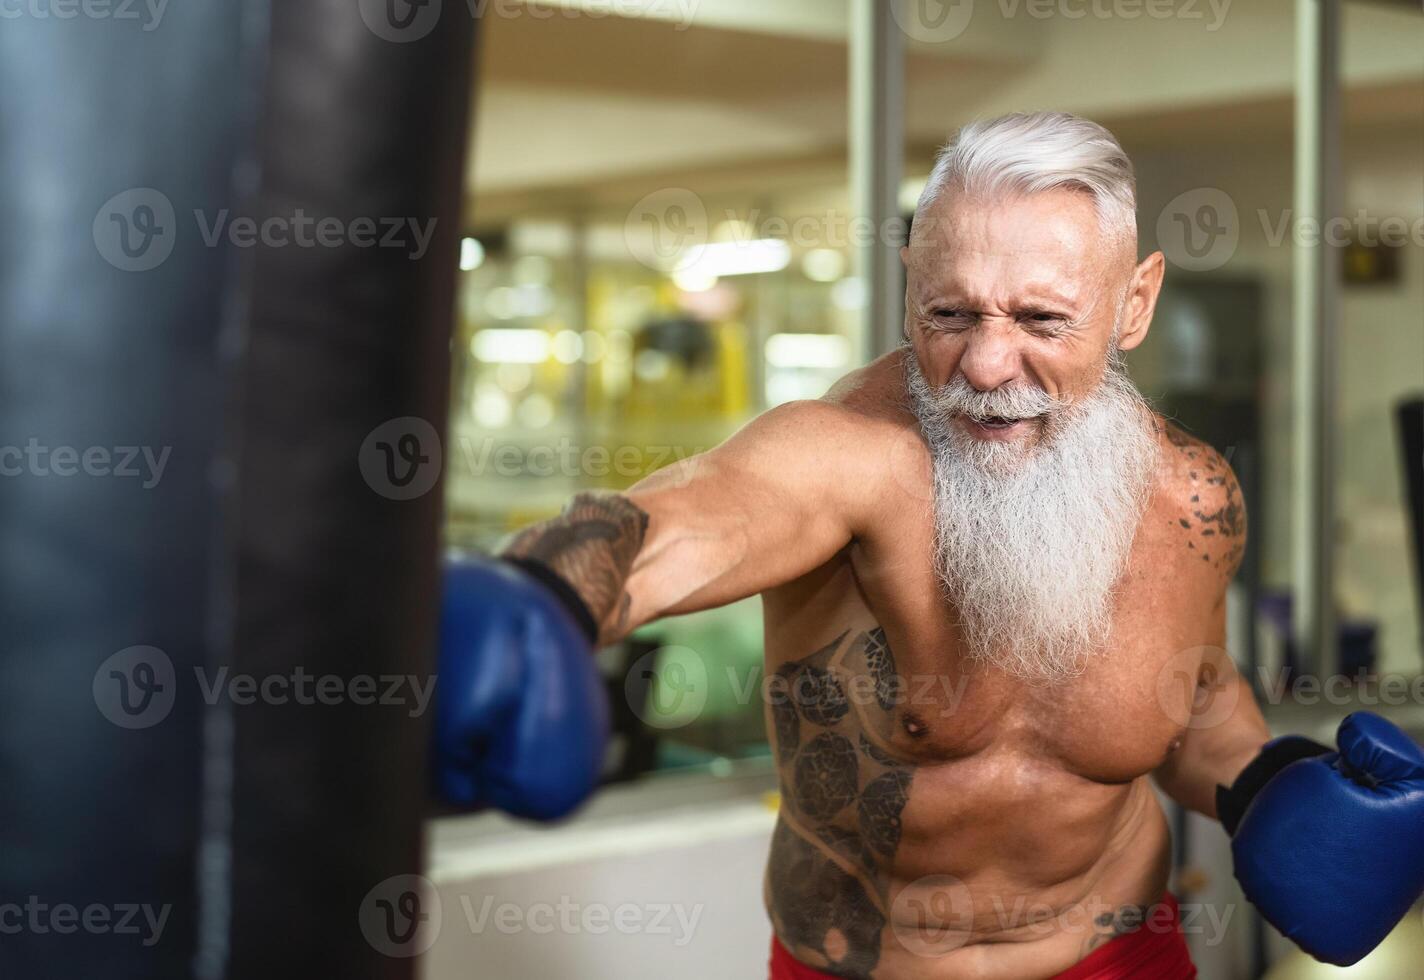 Senior man boxer training hard - Elderly male boxing in sport gym center club - Health fitness and sporty activity concept photo